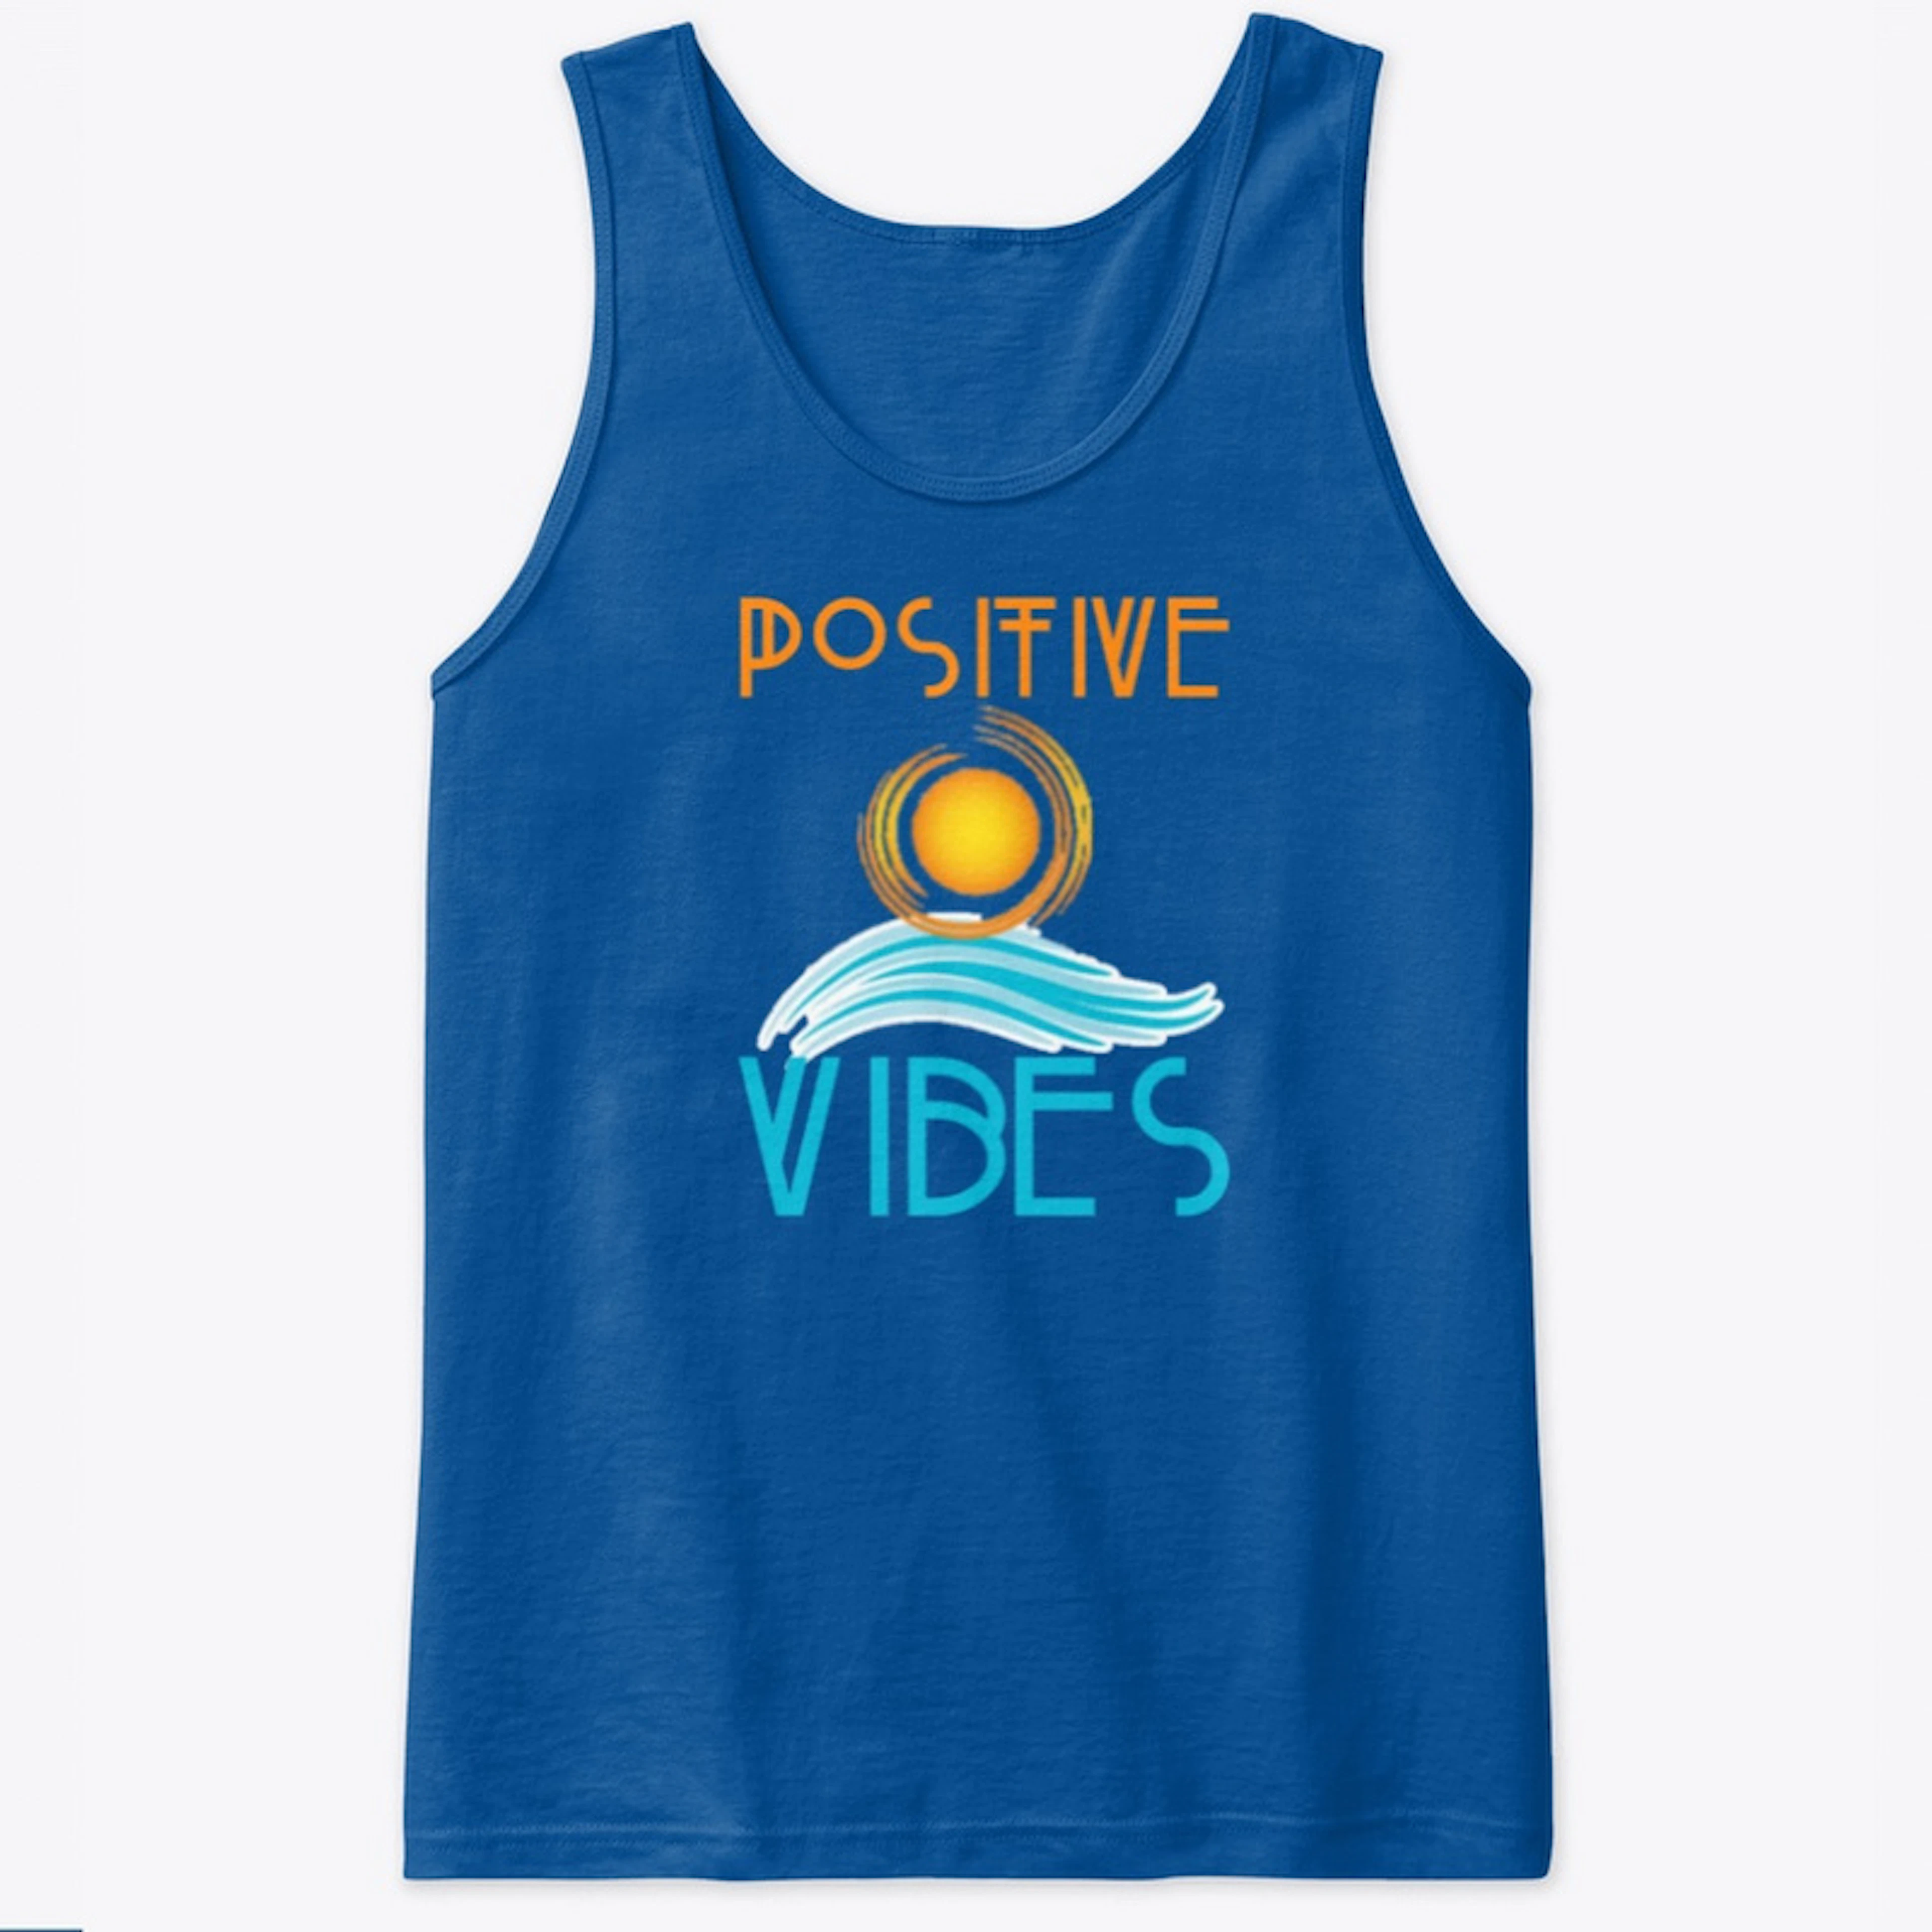 Positive Vibes: Sun and Surf